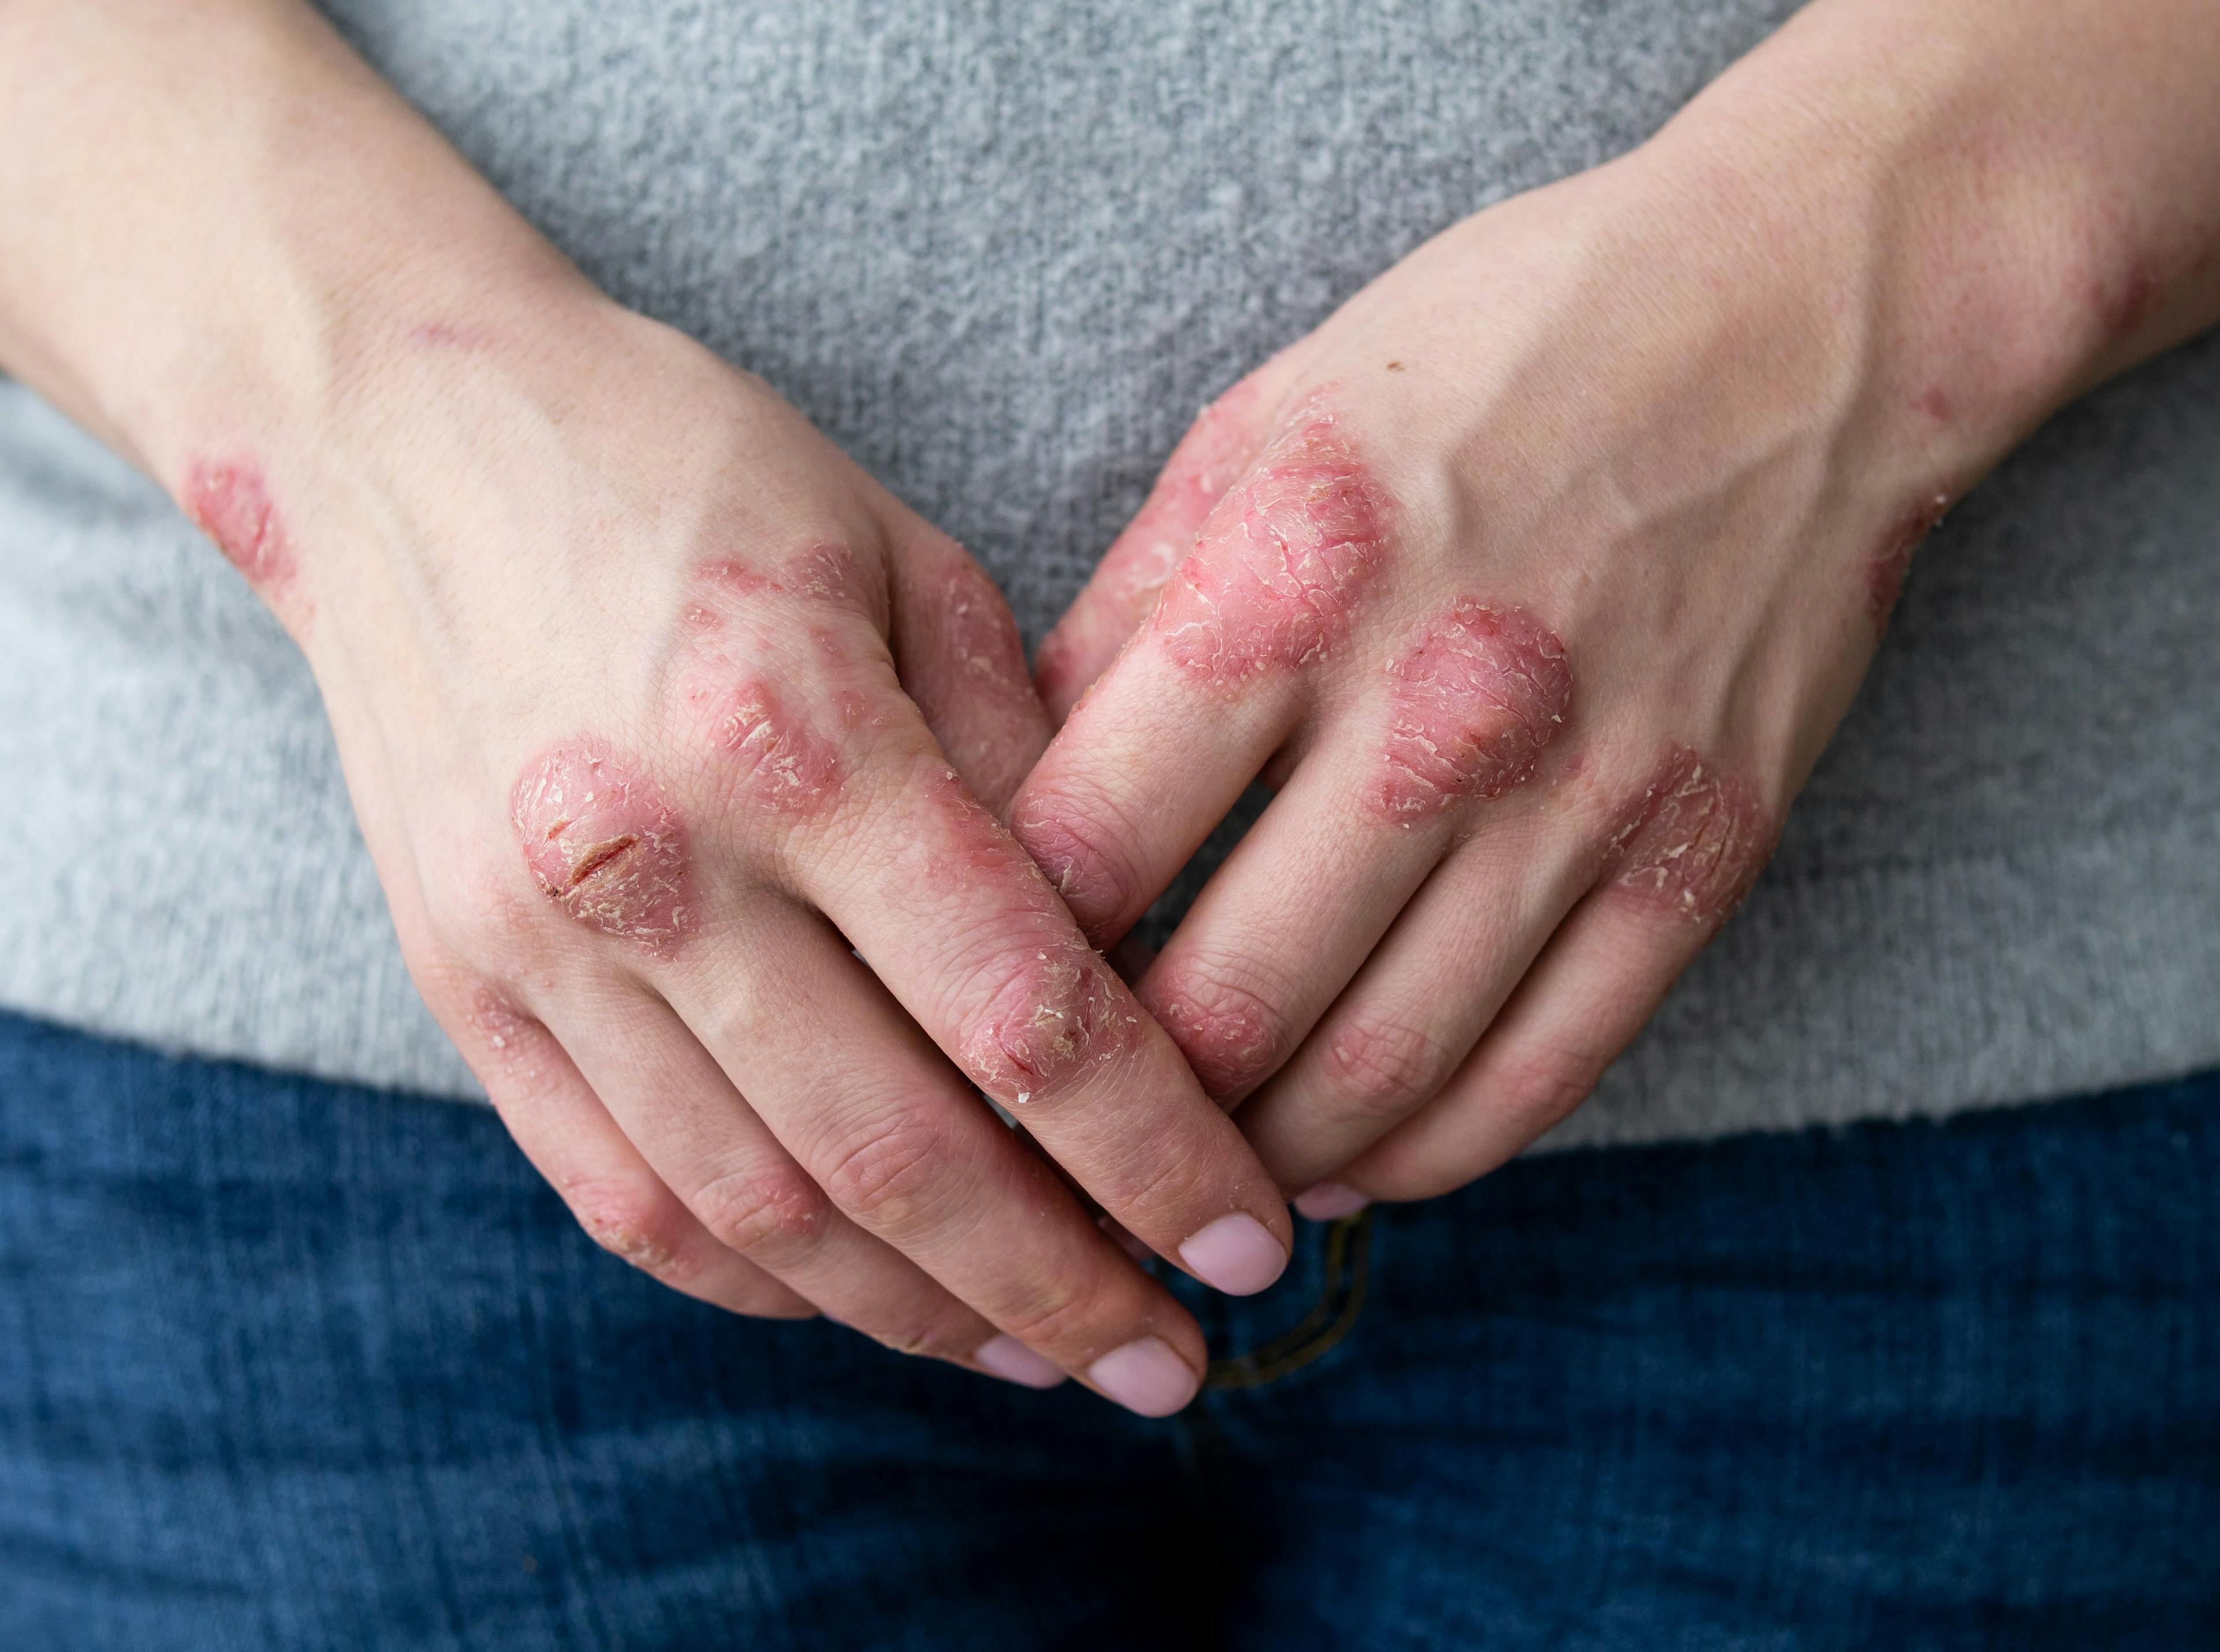 Close up view of psoriasis on the hands and knuckles